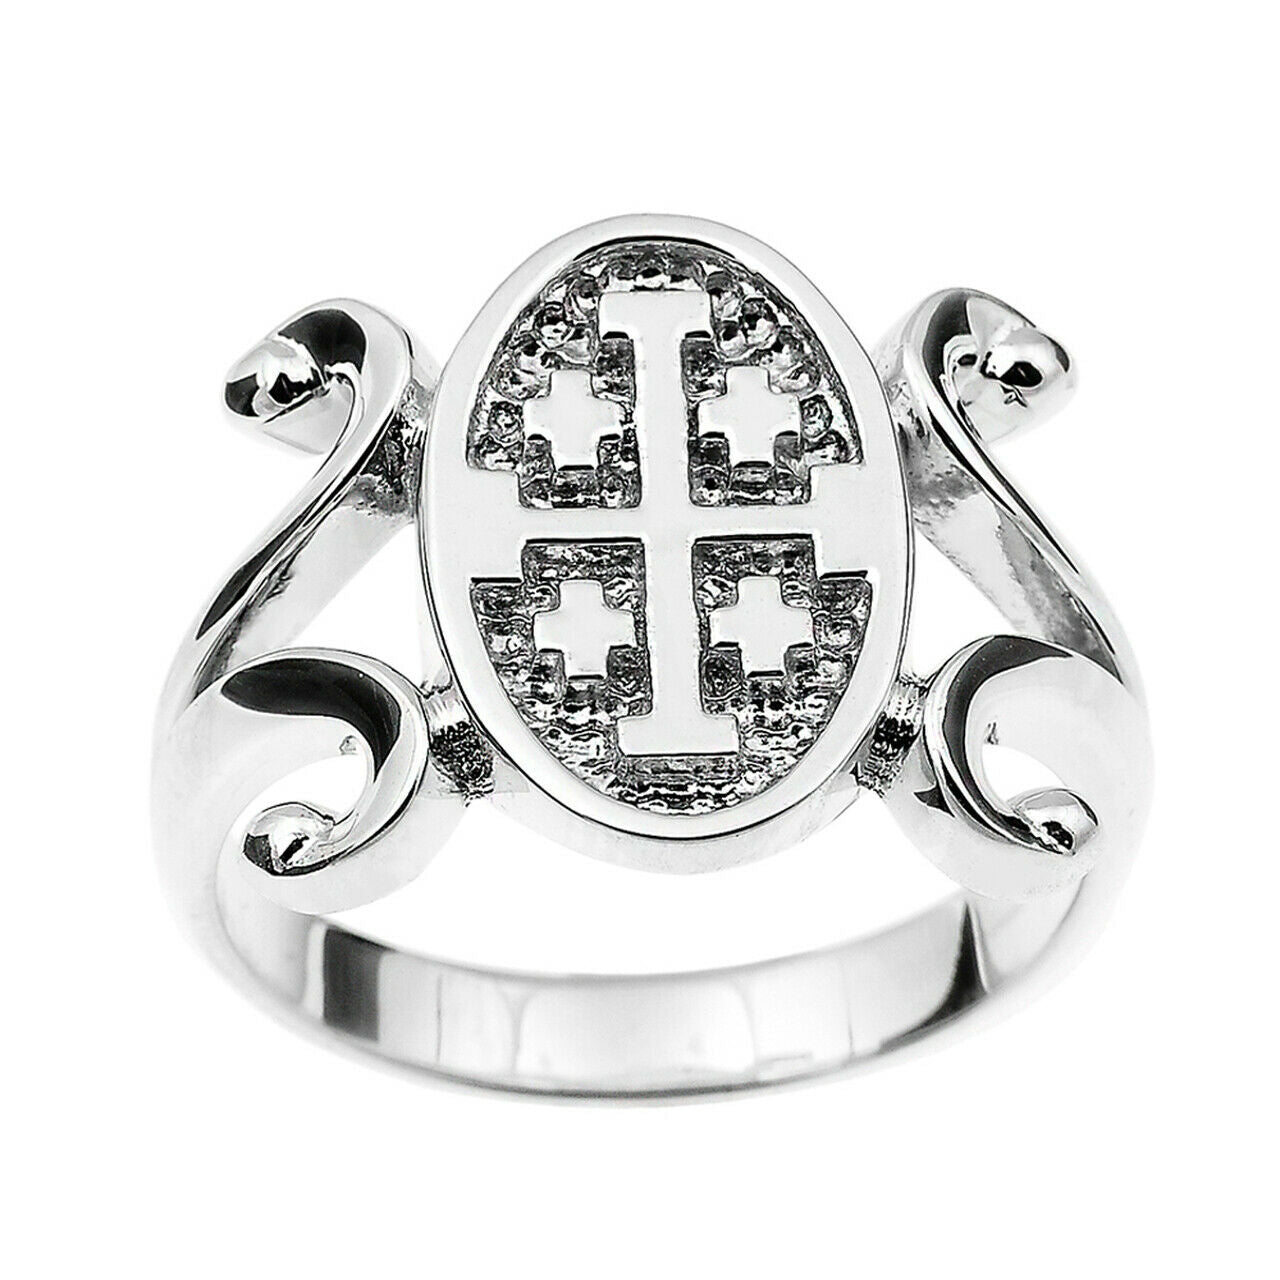 Genuine 925 Sterling Silver Jerusalem Cross Women Ring Made in USA -All Any Size